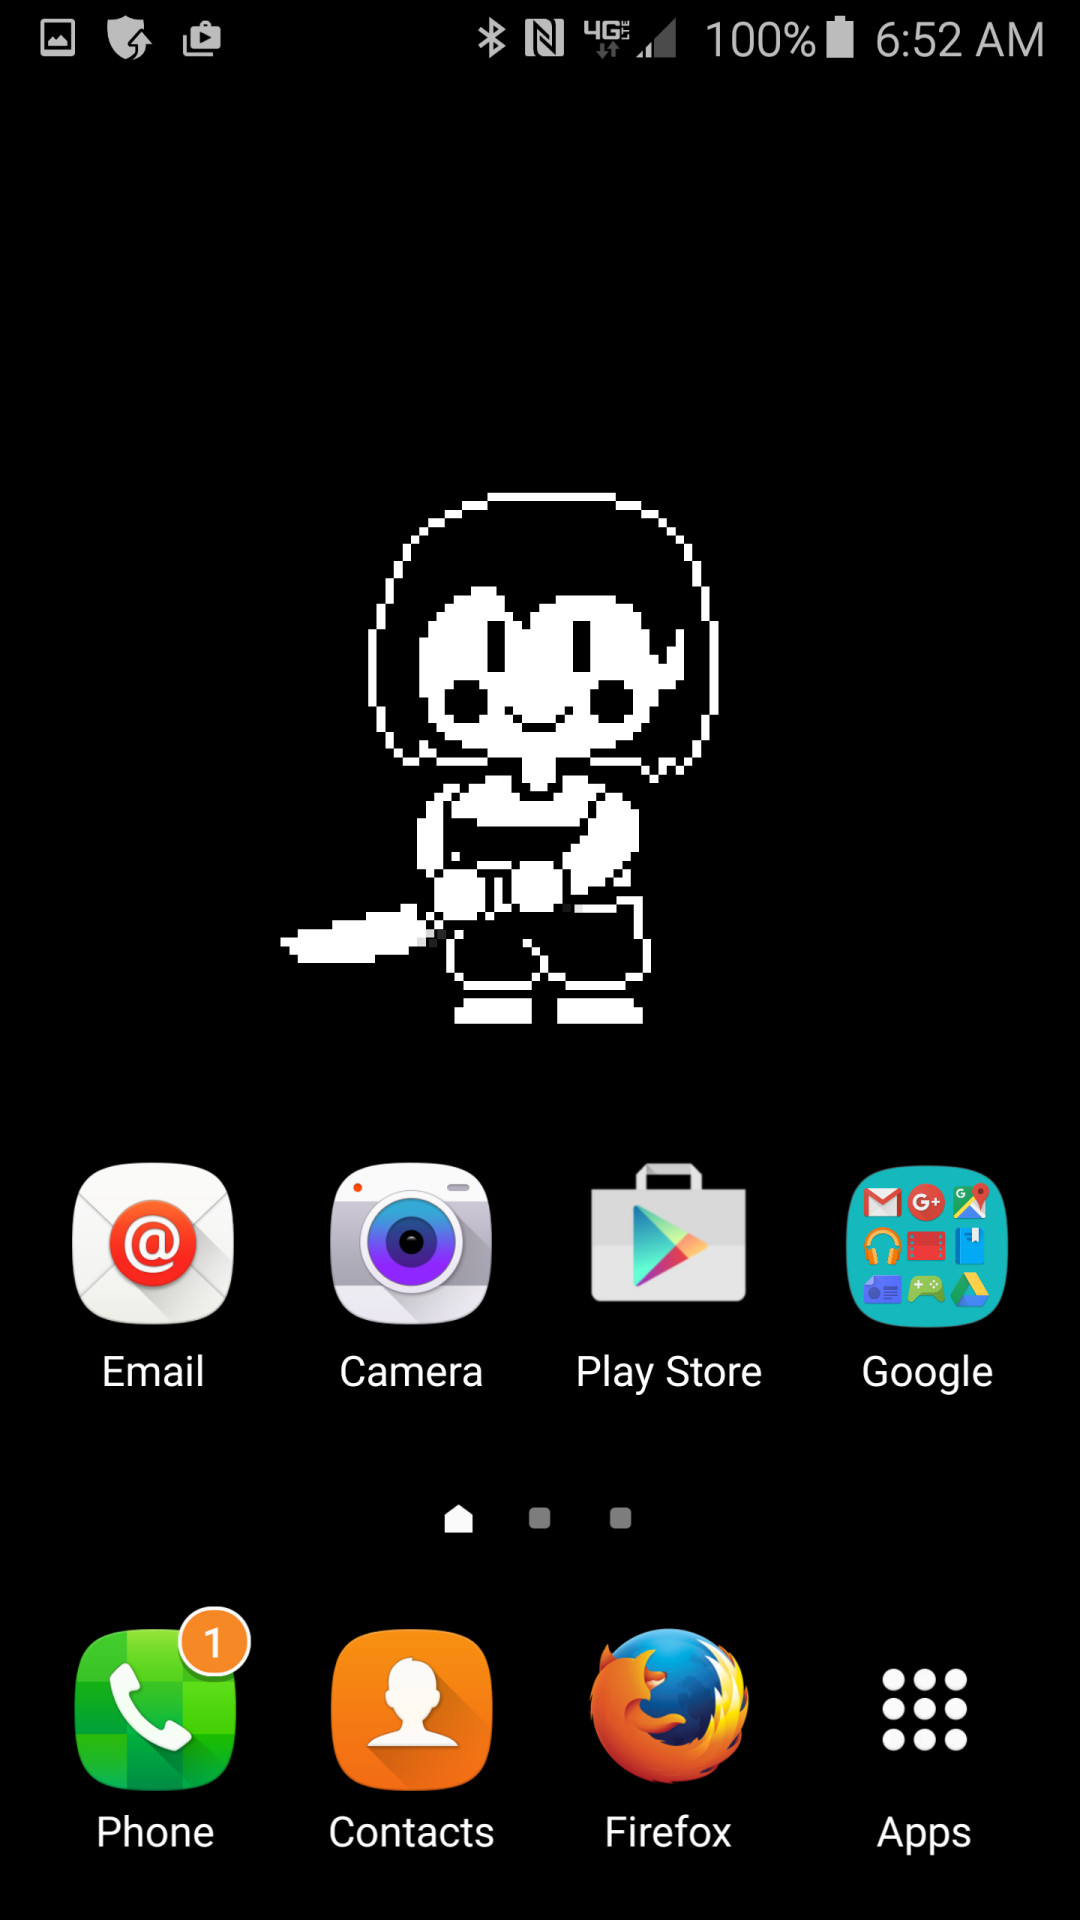 1080x1920 deajj: Fanmade Undertale Live Wallpapers v5.1... - I want to play a game,  Dressrosa.